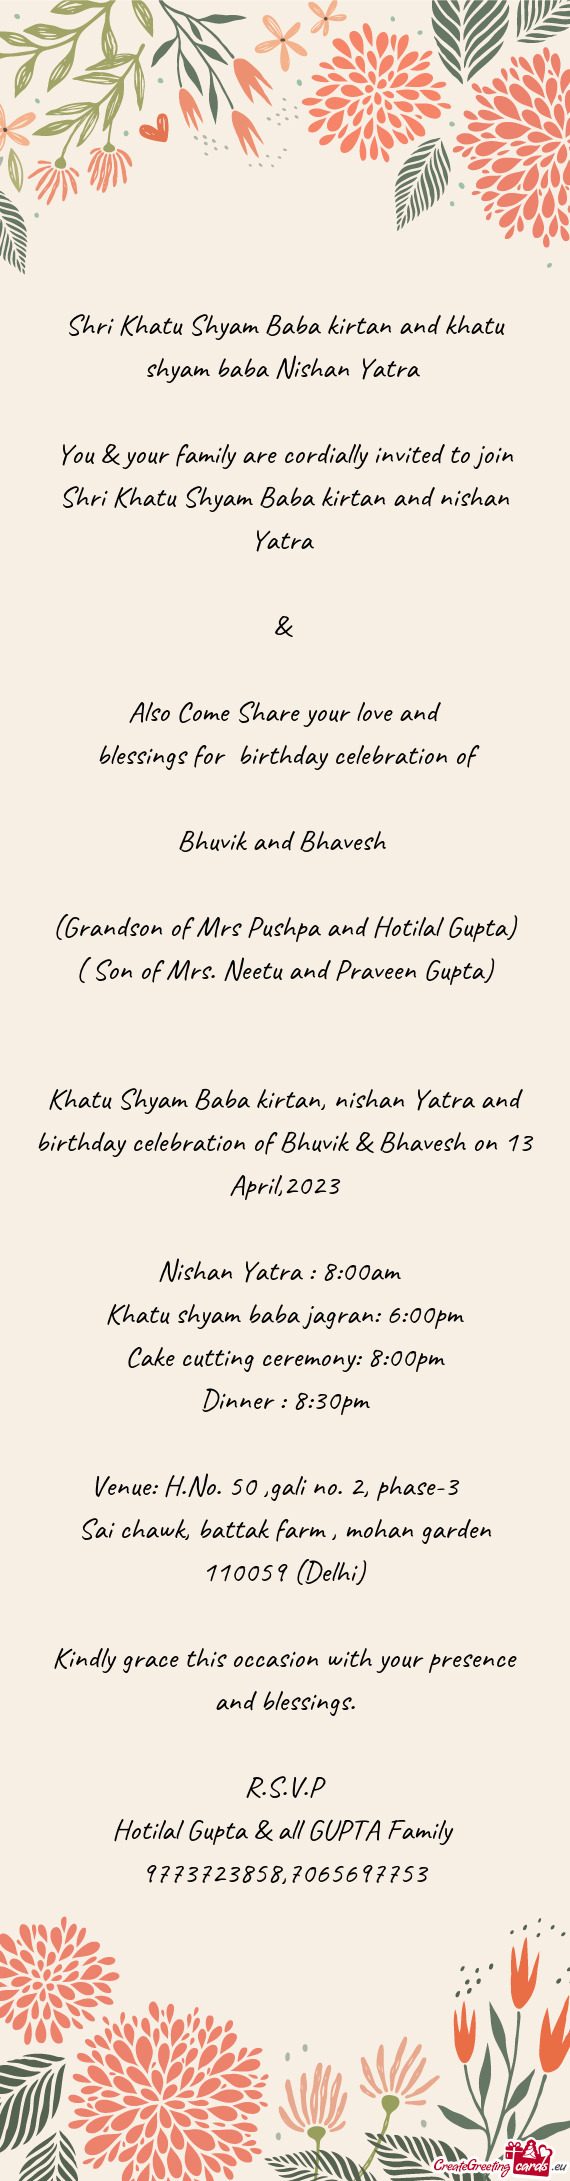 You & your family are cordially invited to join Shri Khatu Shyam Baba kirtan and nishan Yatra